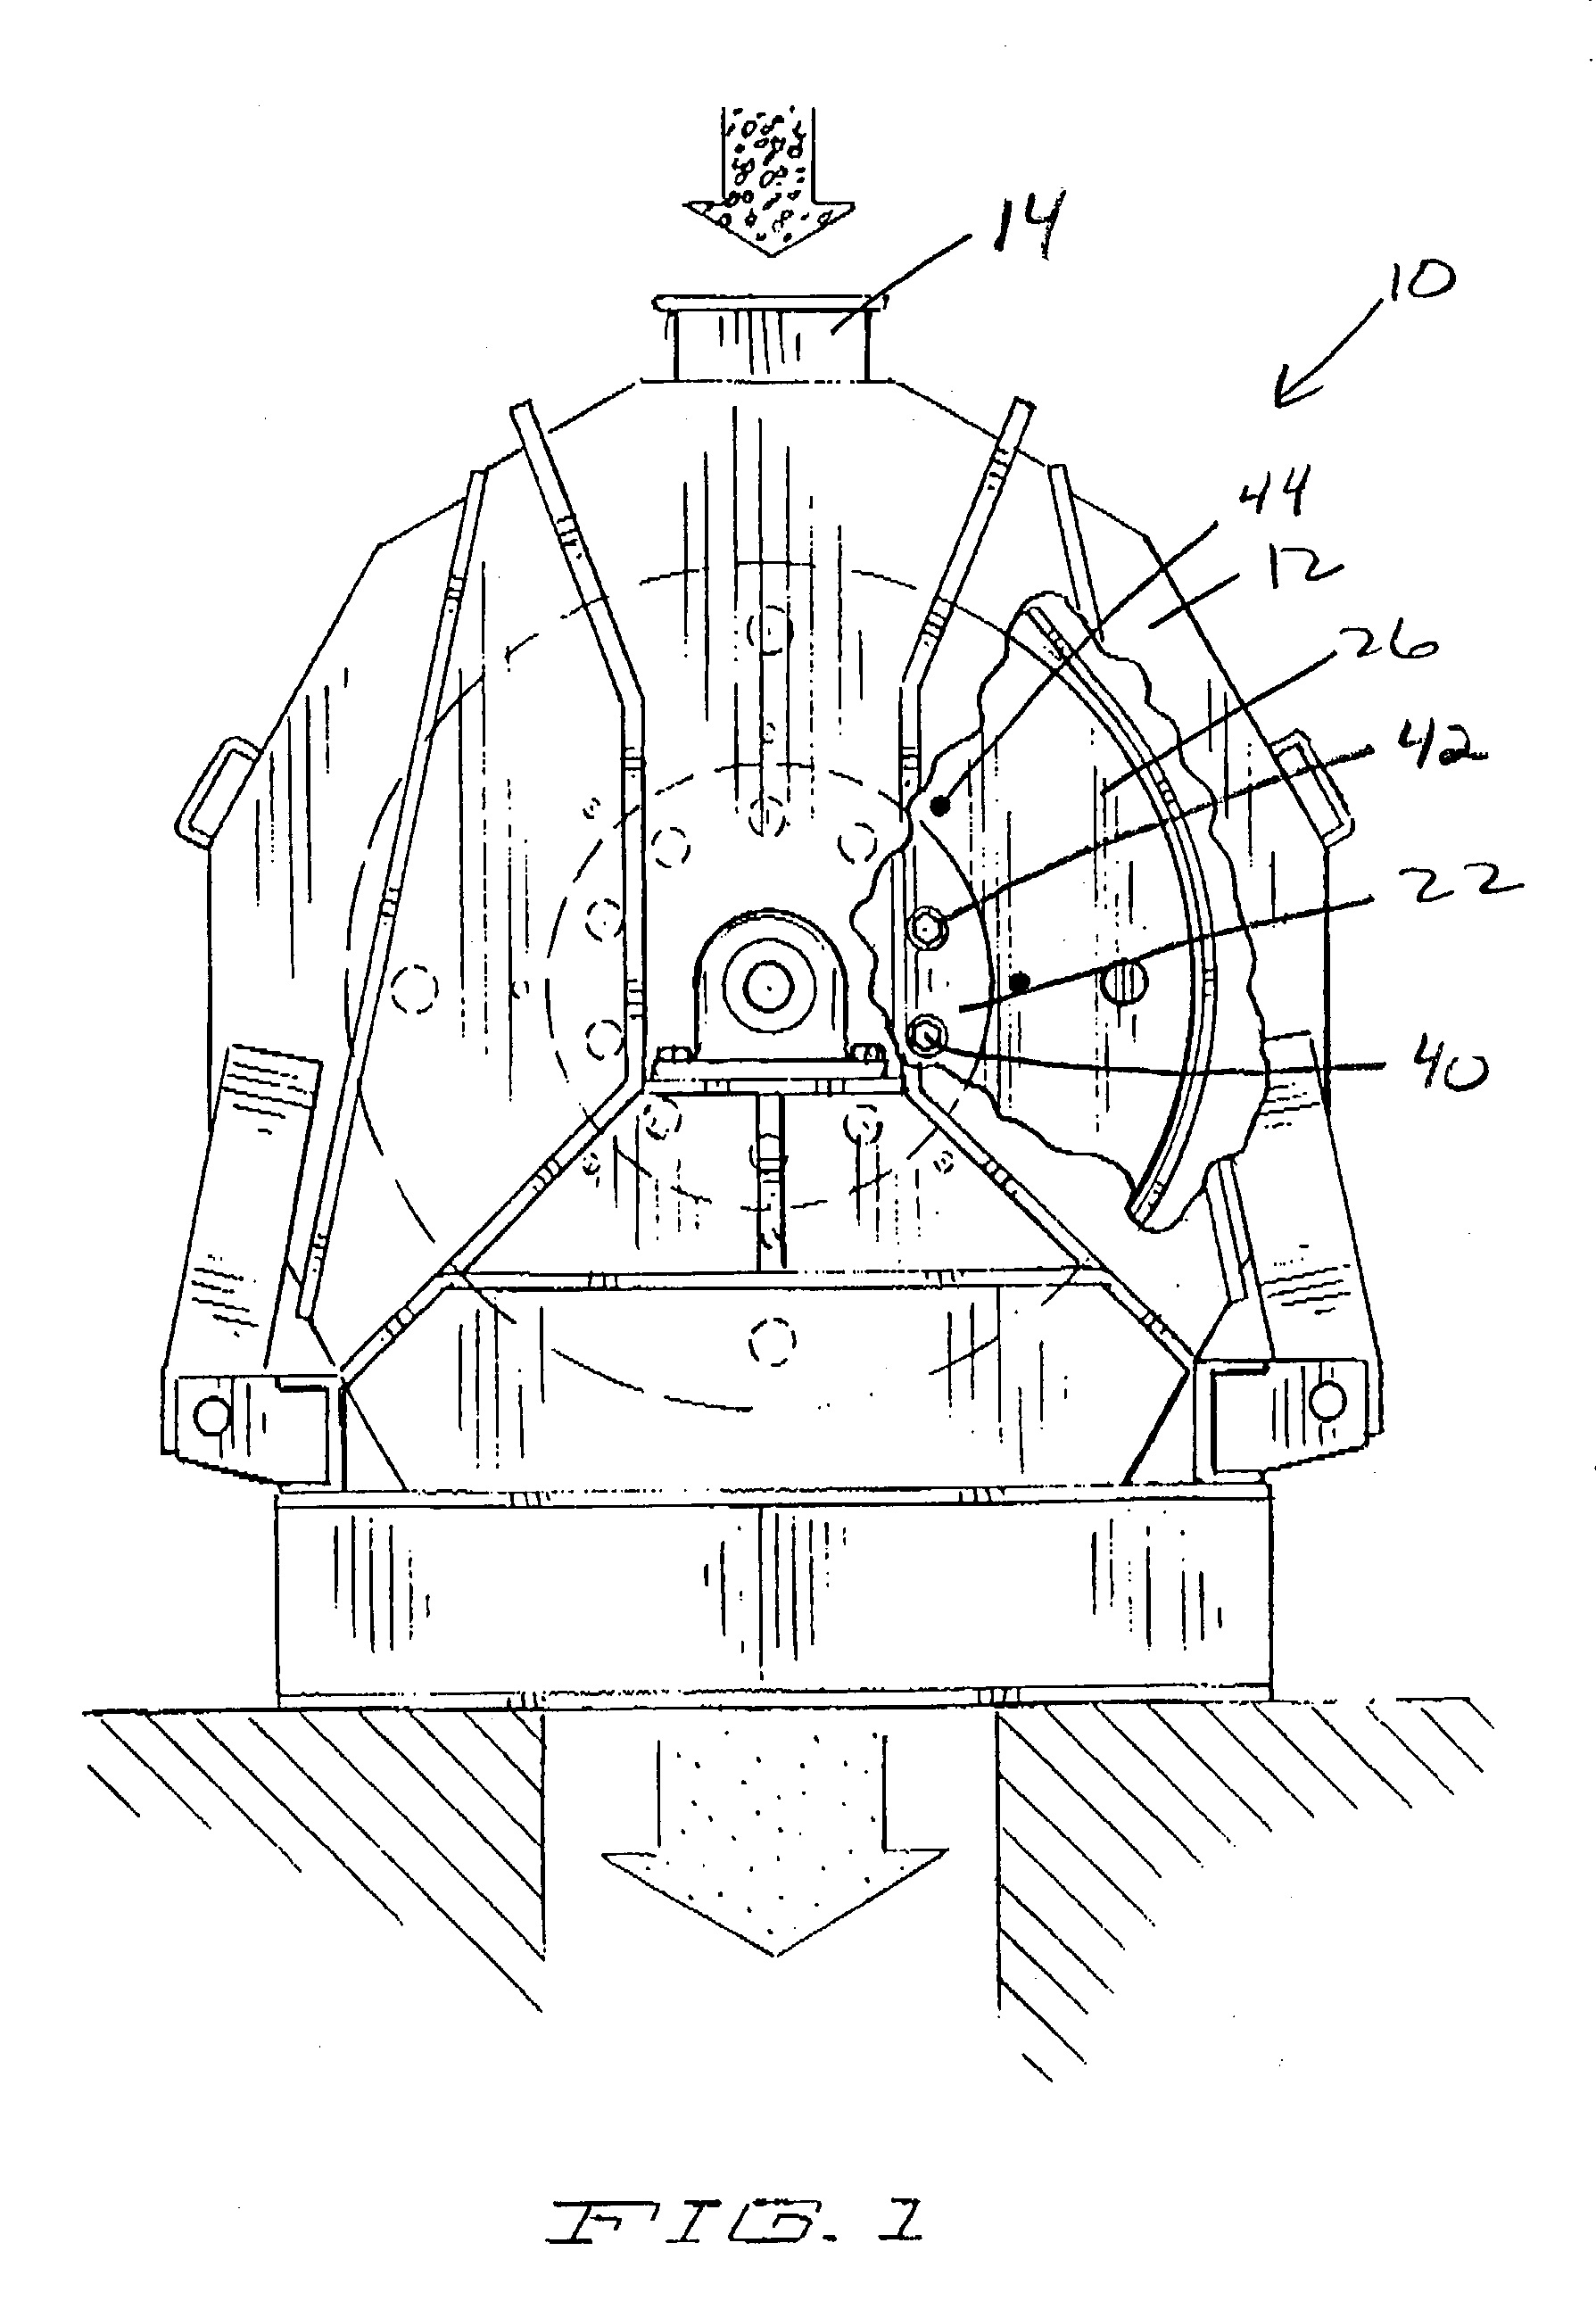 Hammermill with stub shaft rotor apparatus and method